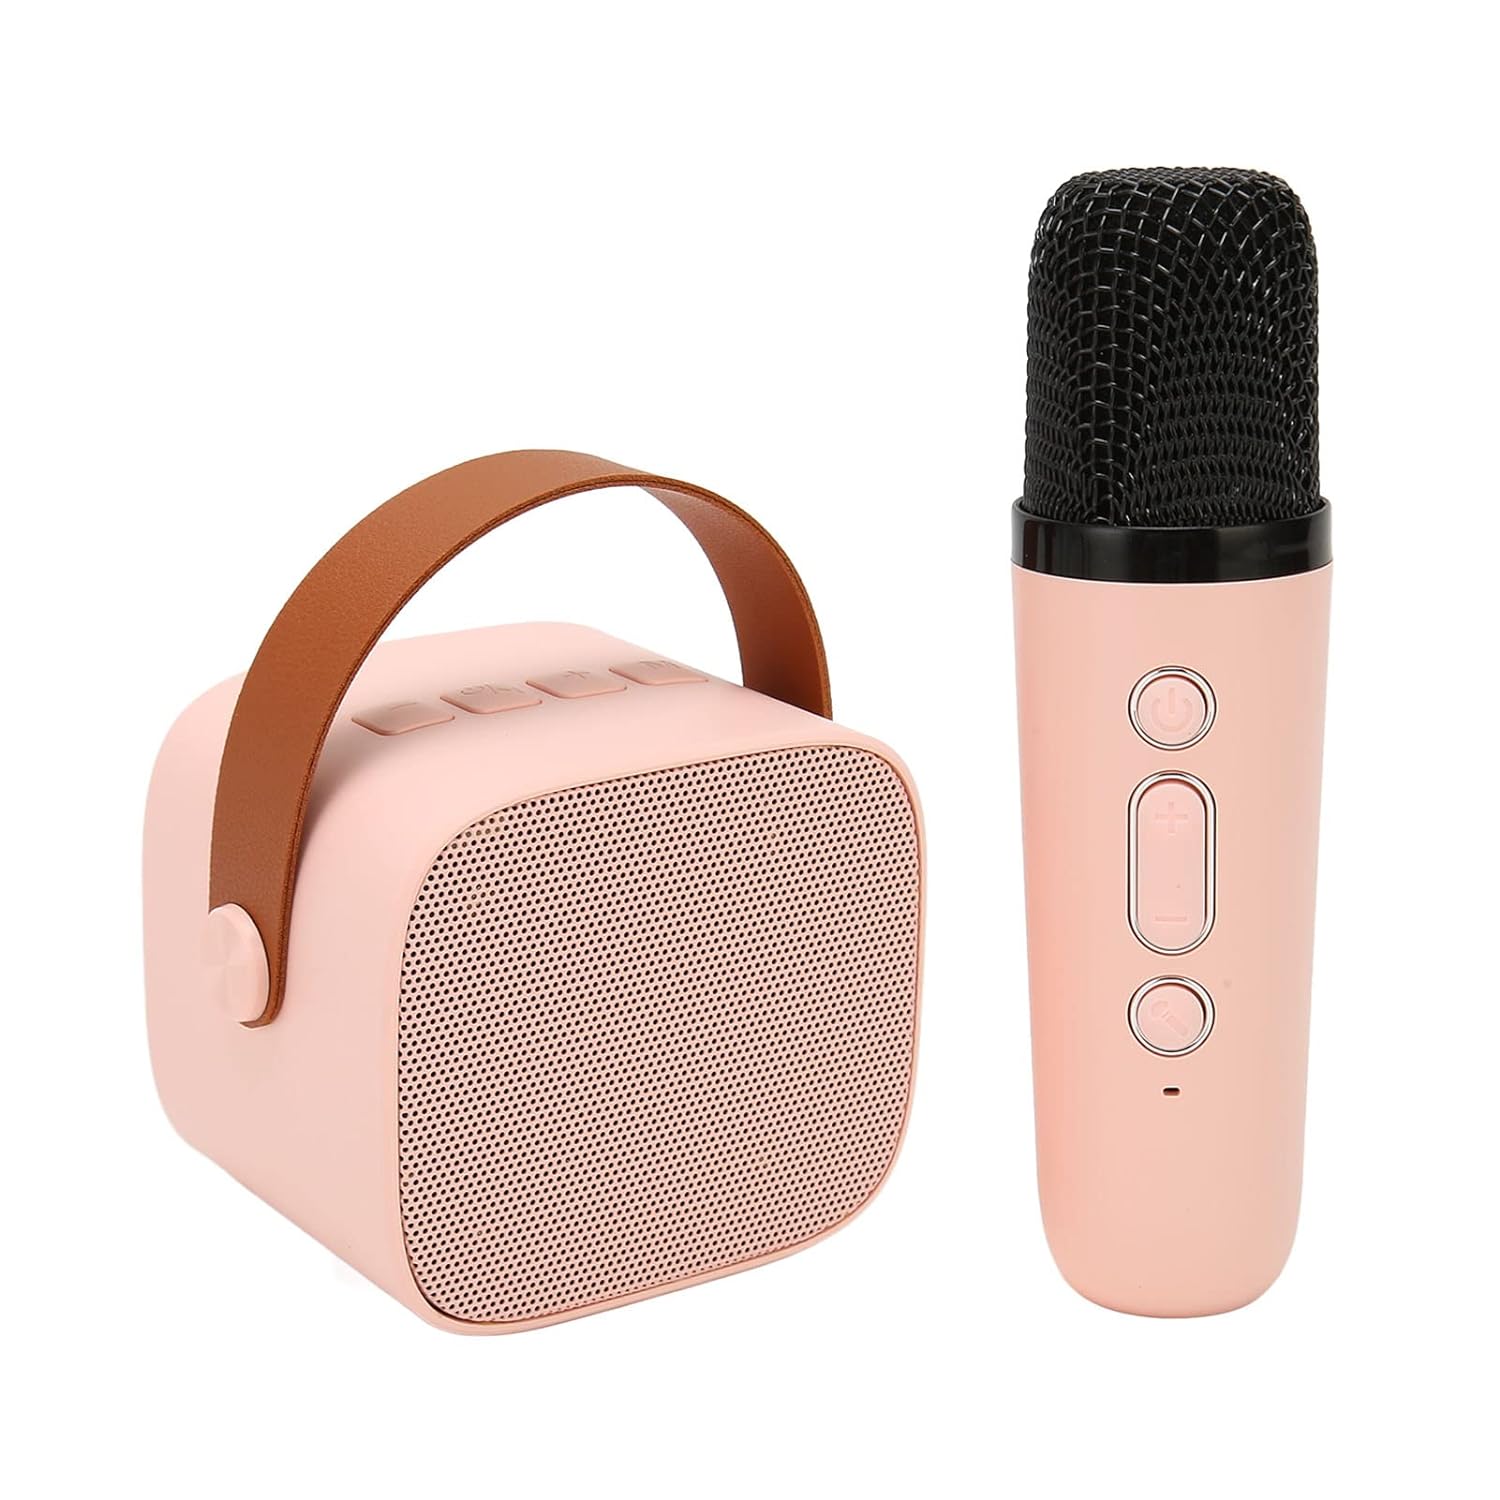 Mini Karaoke Machine with Wireless Microphones for Kids Adults, HD Stereo Rechargeable Retro Portable Bluetooth Speaker Gift for Girls Boys Toys ()